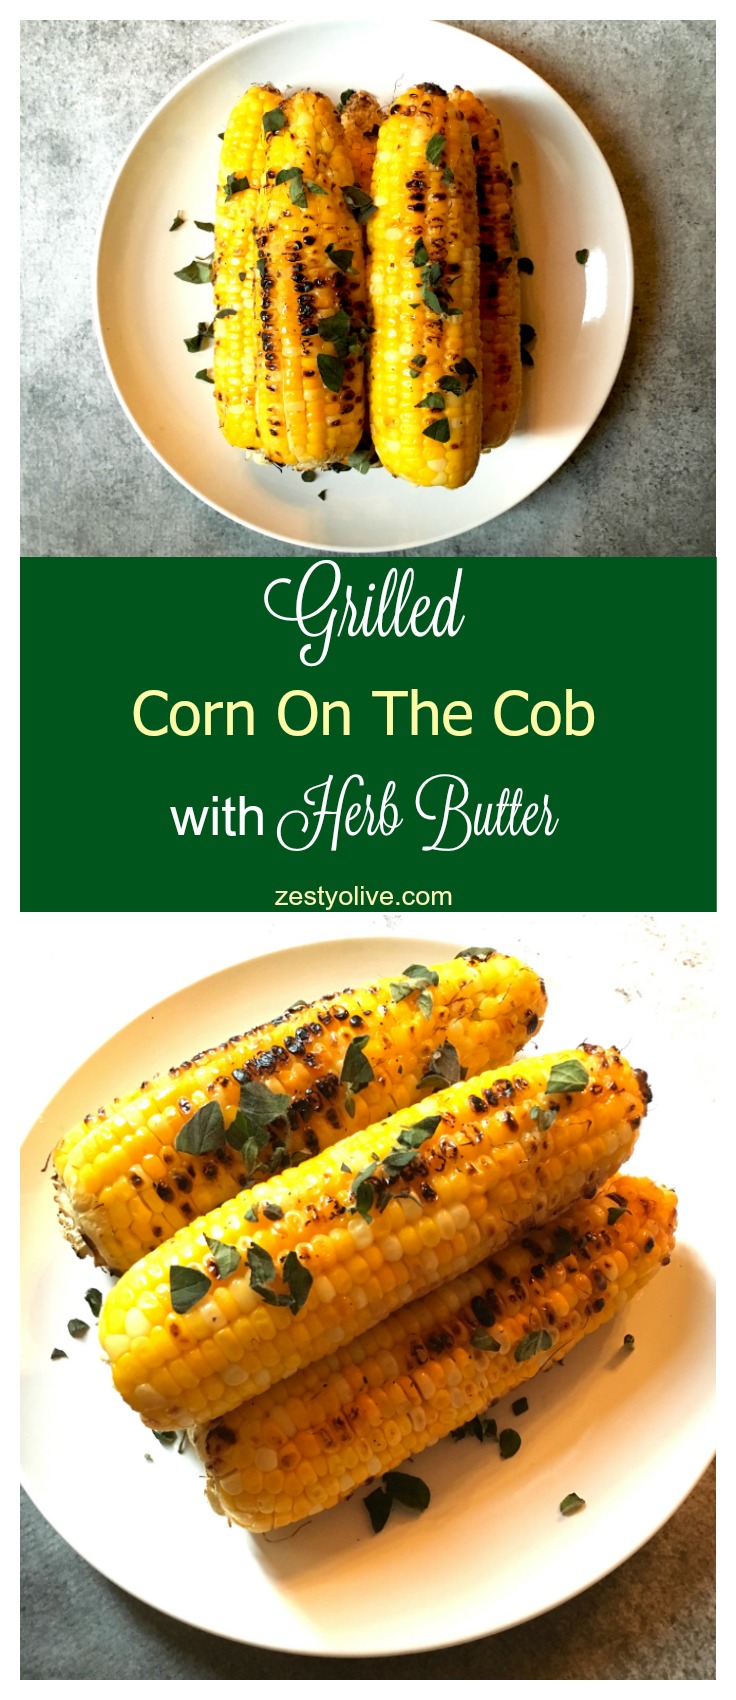 Grilled Corn On The Cob With Herb Butter